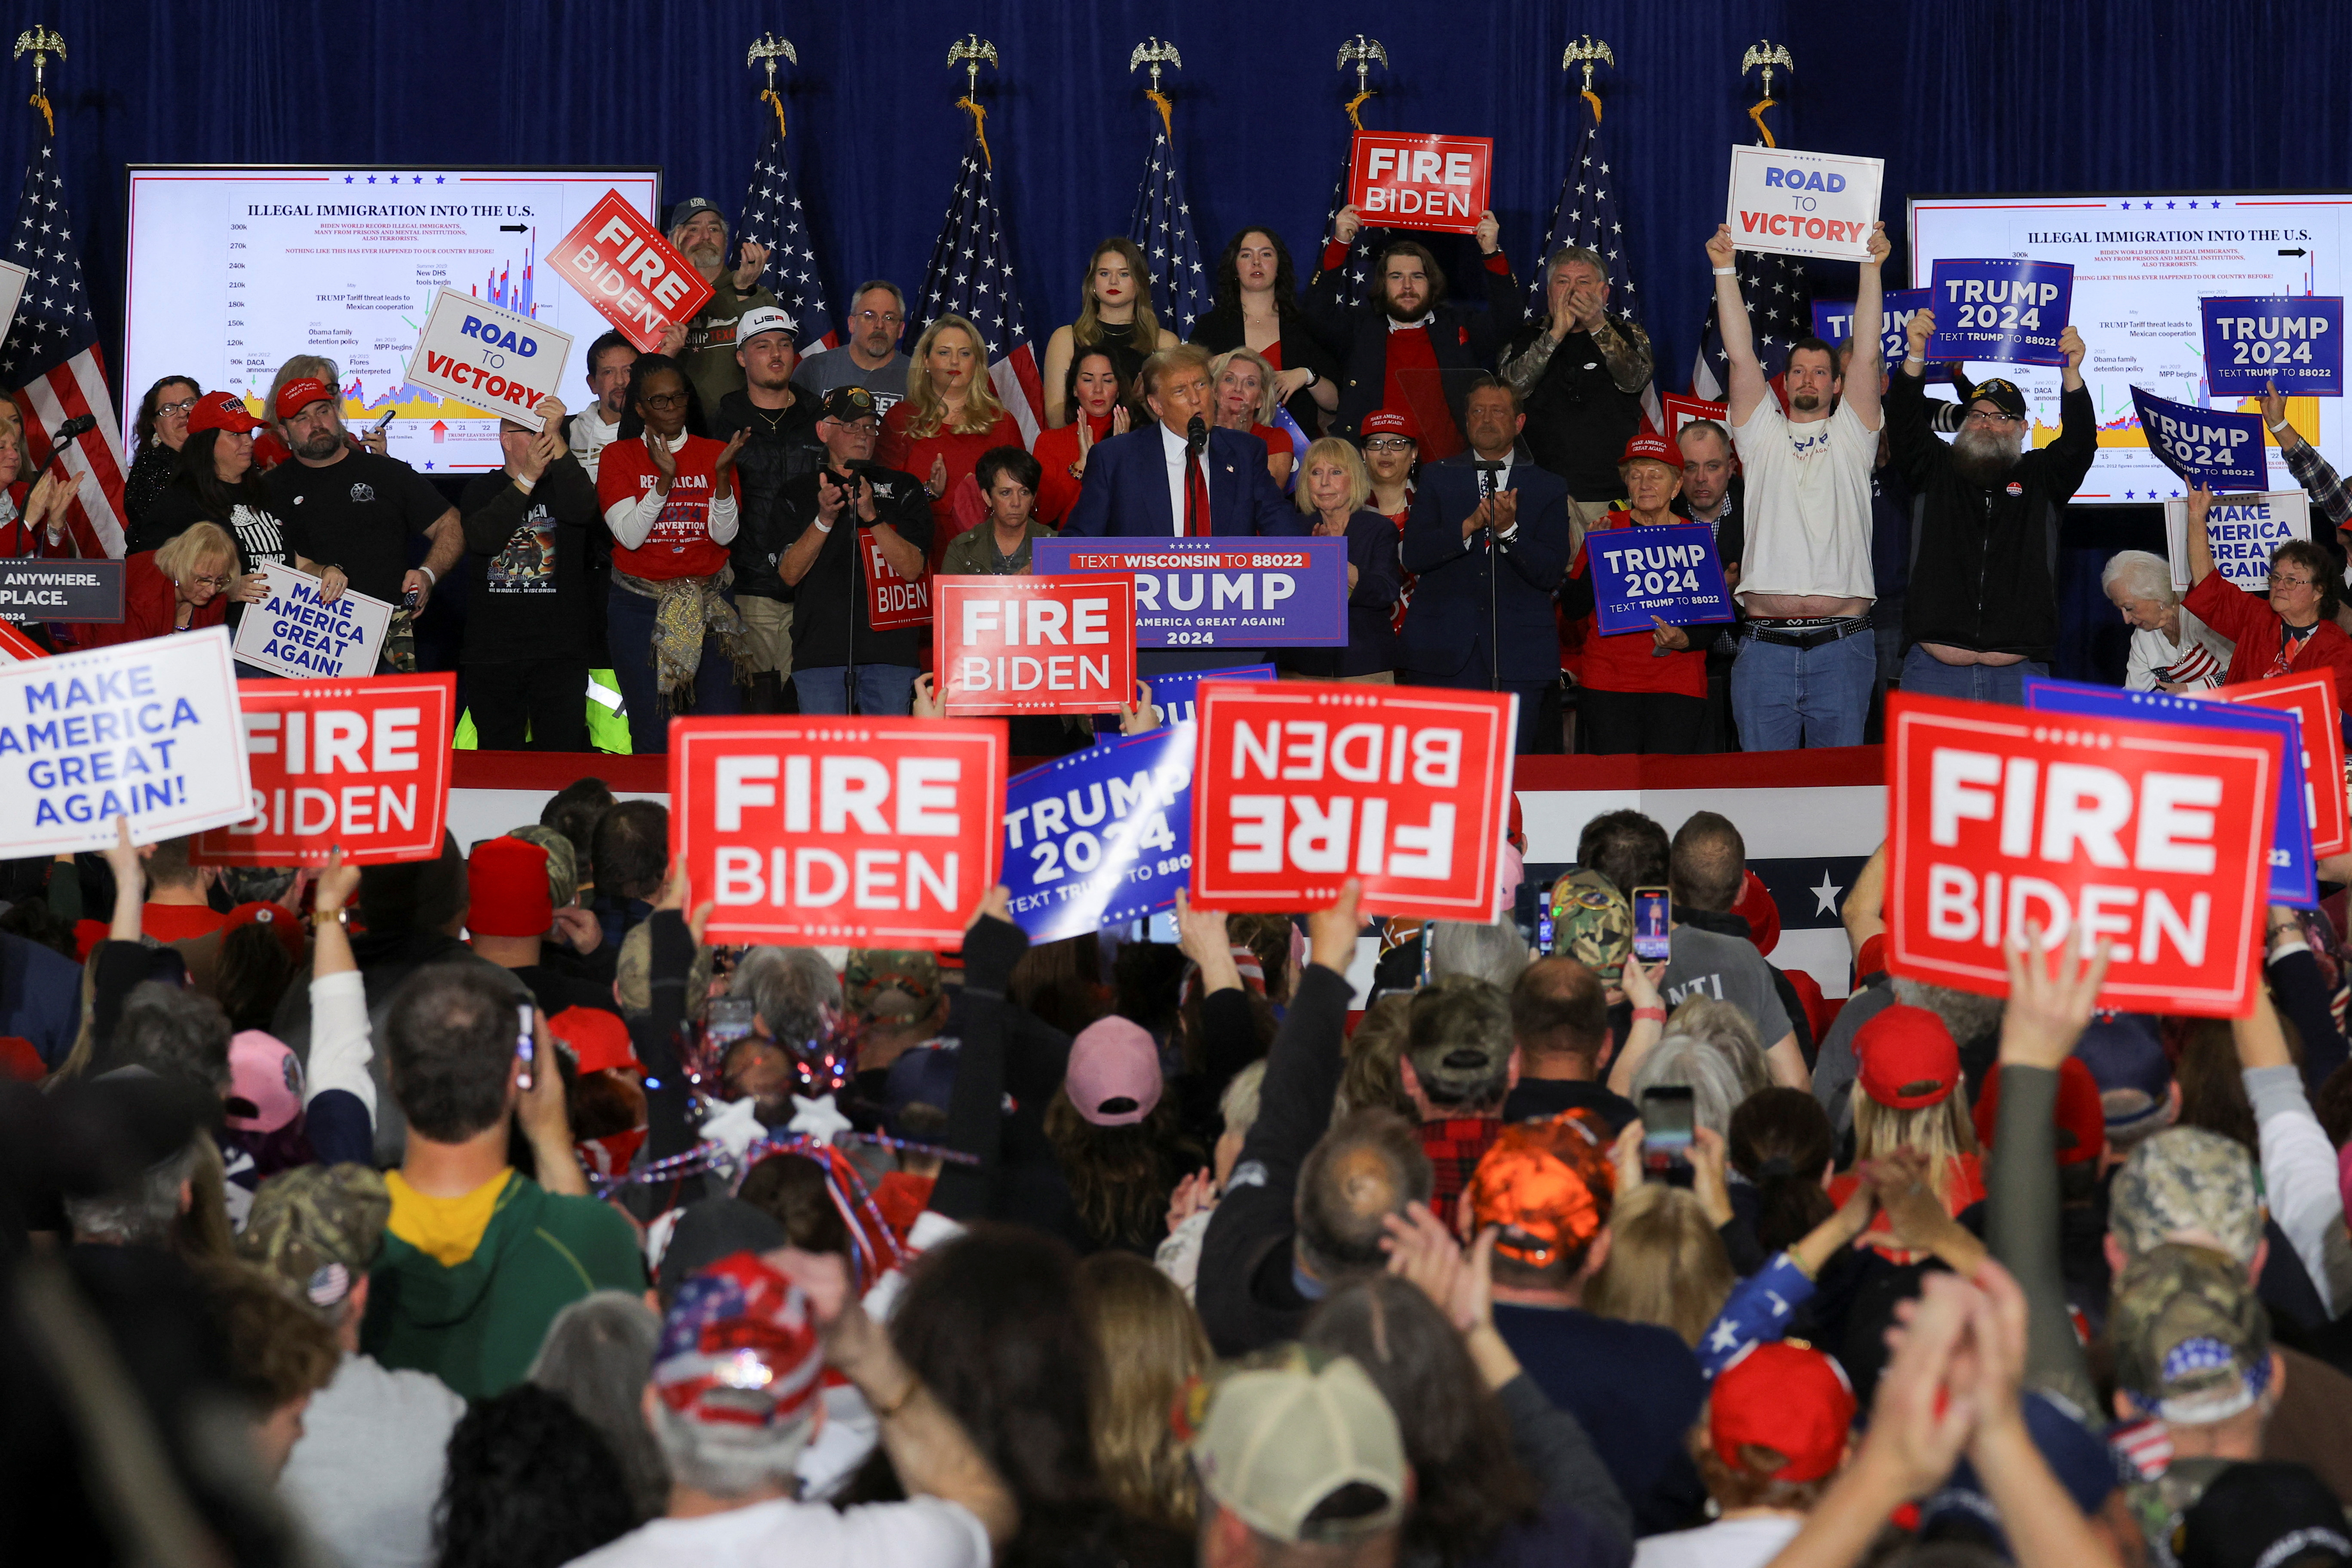 Republican presidential candidate and former U.S. President Donald Trump's campaign rally in Green Bay